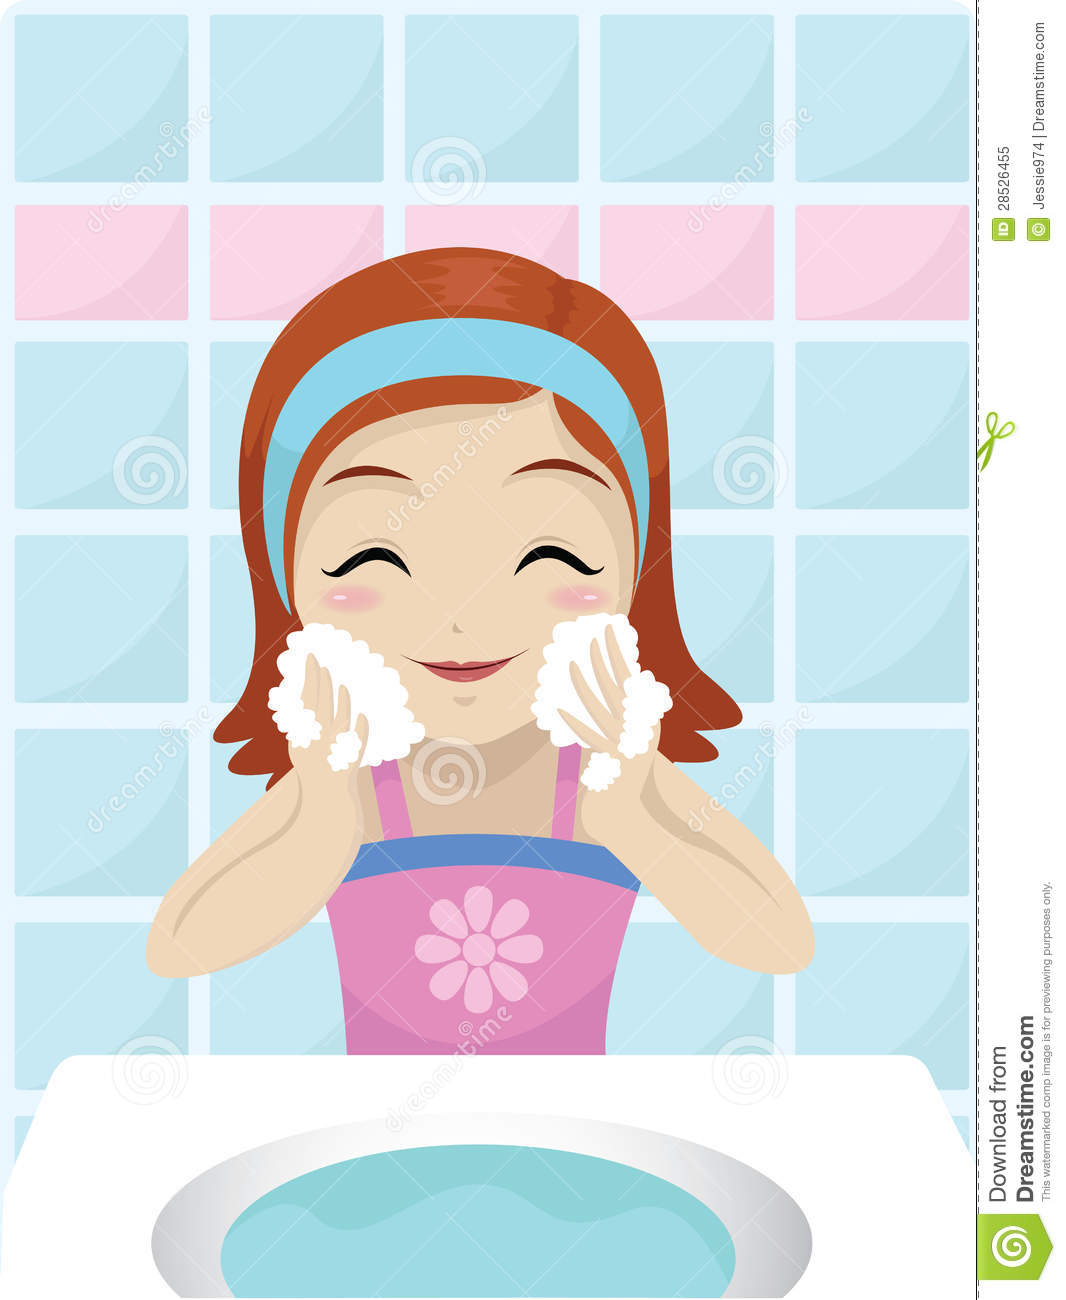 Back   Gallery For   Washing Your Face Clip Art